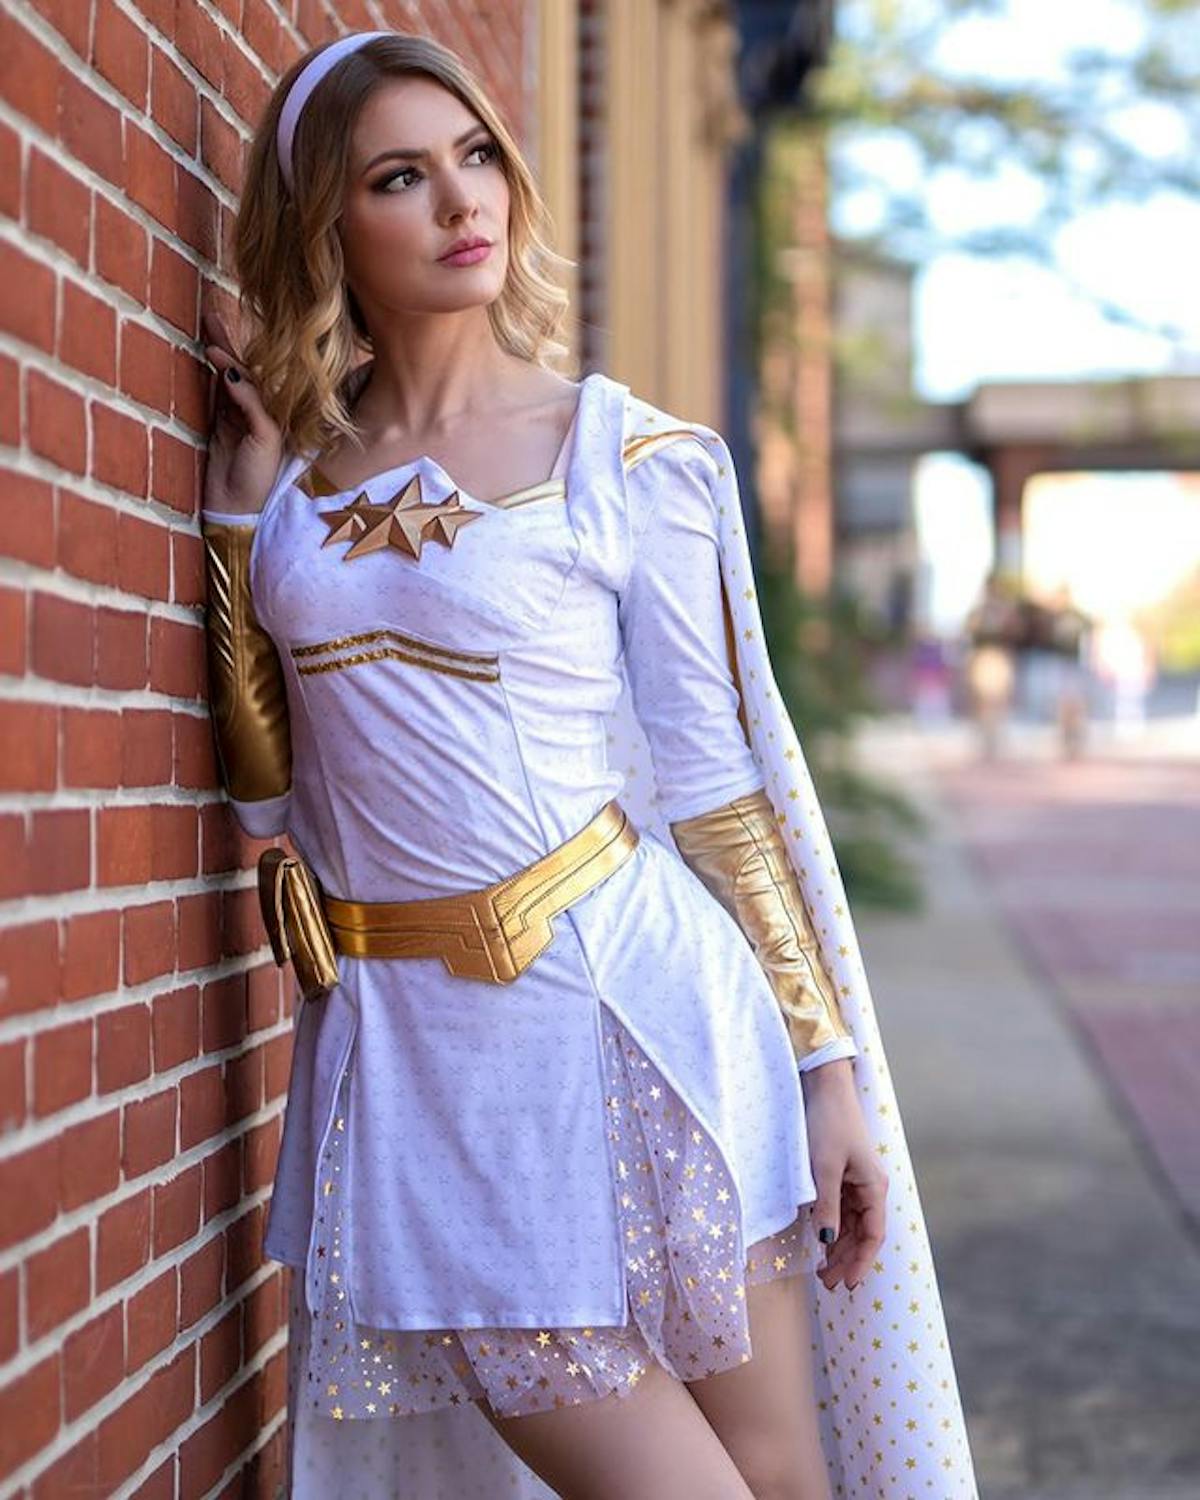  cosplay of starlight from the tv series the boys